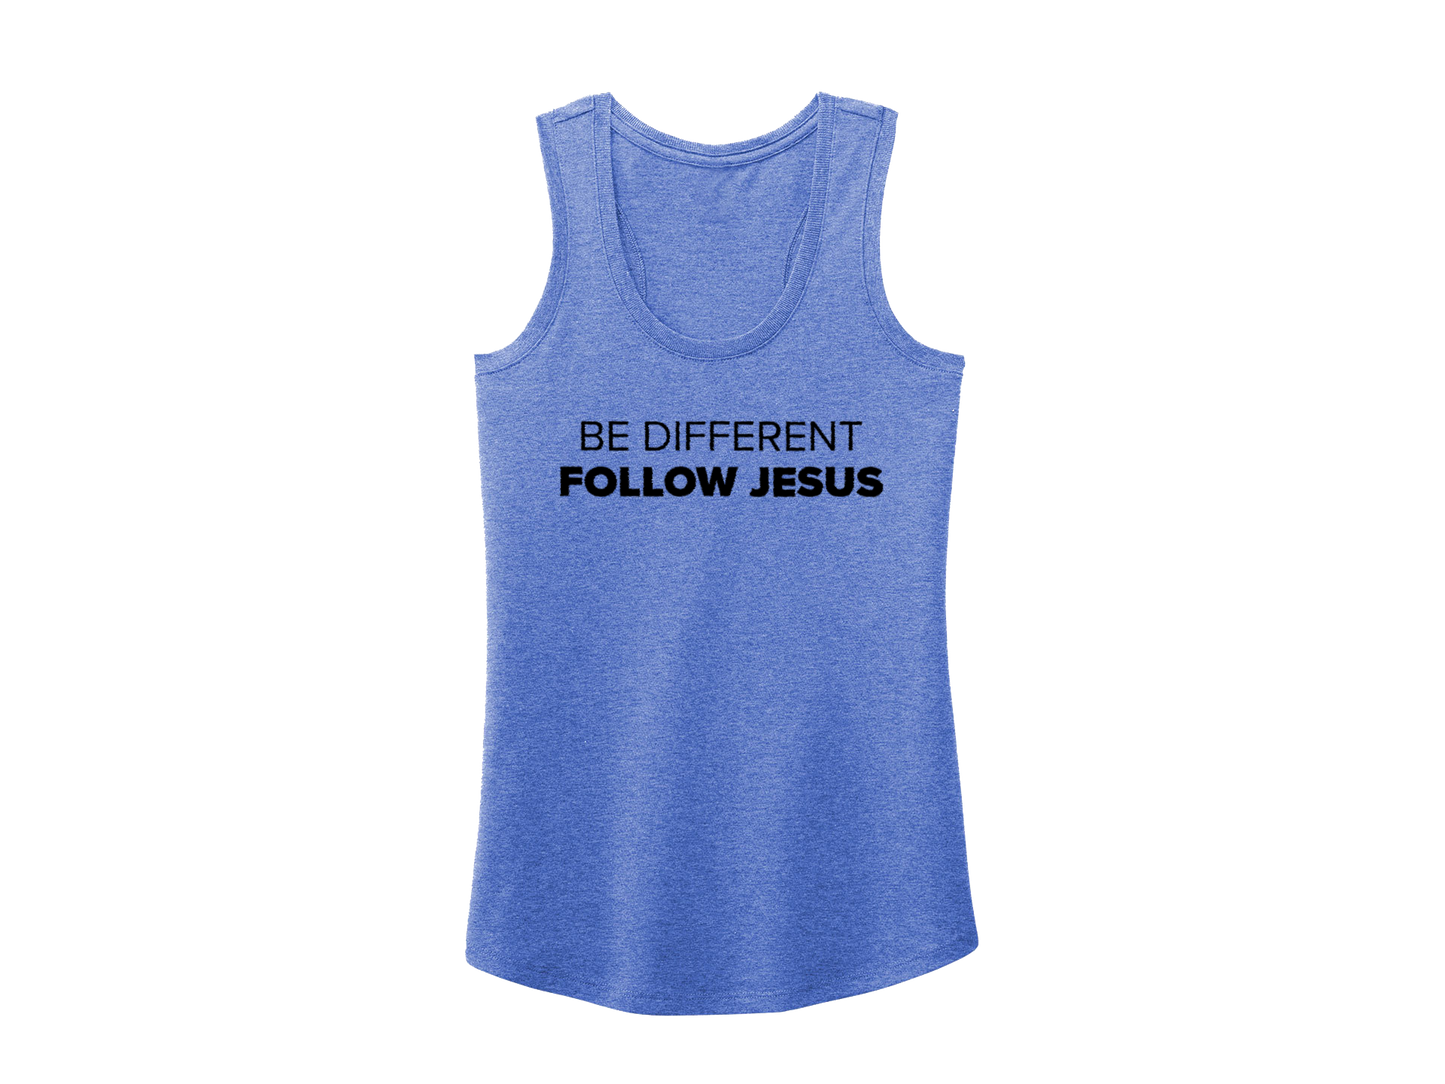 BE DIFFERENT FOLLOW JESUS TANK BLUE - CHRISTIAN CLOTHING